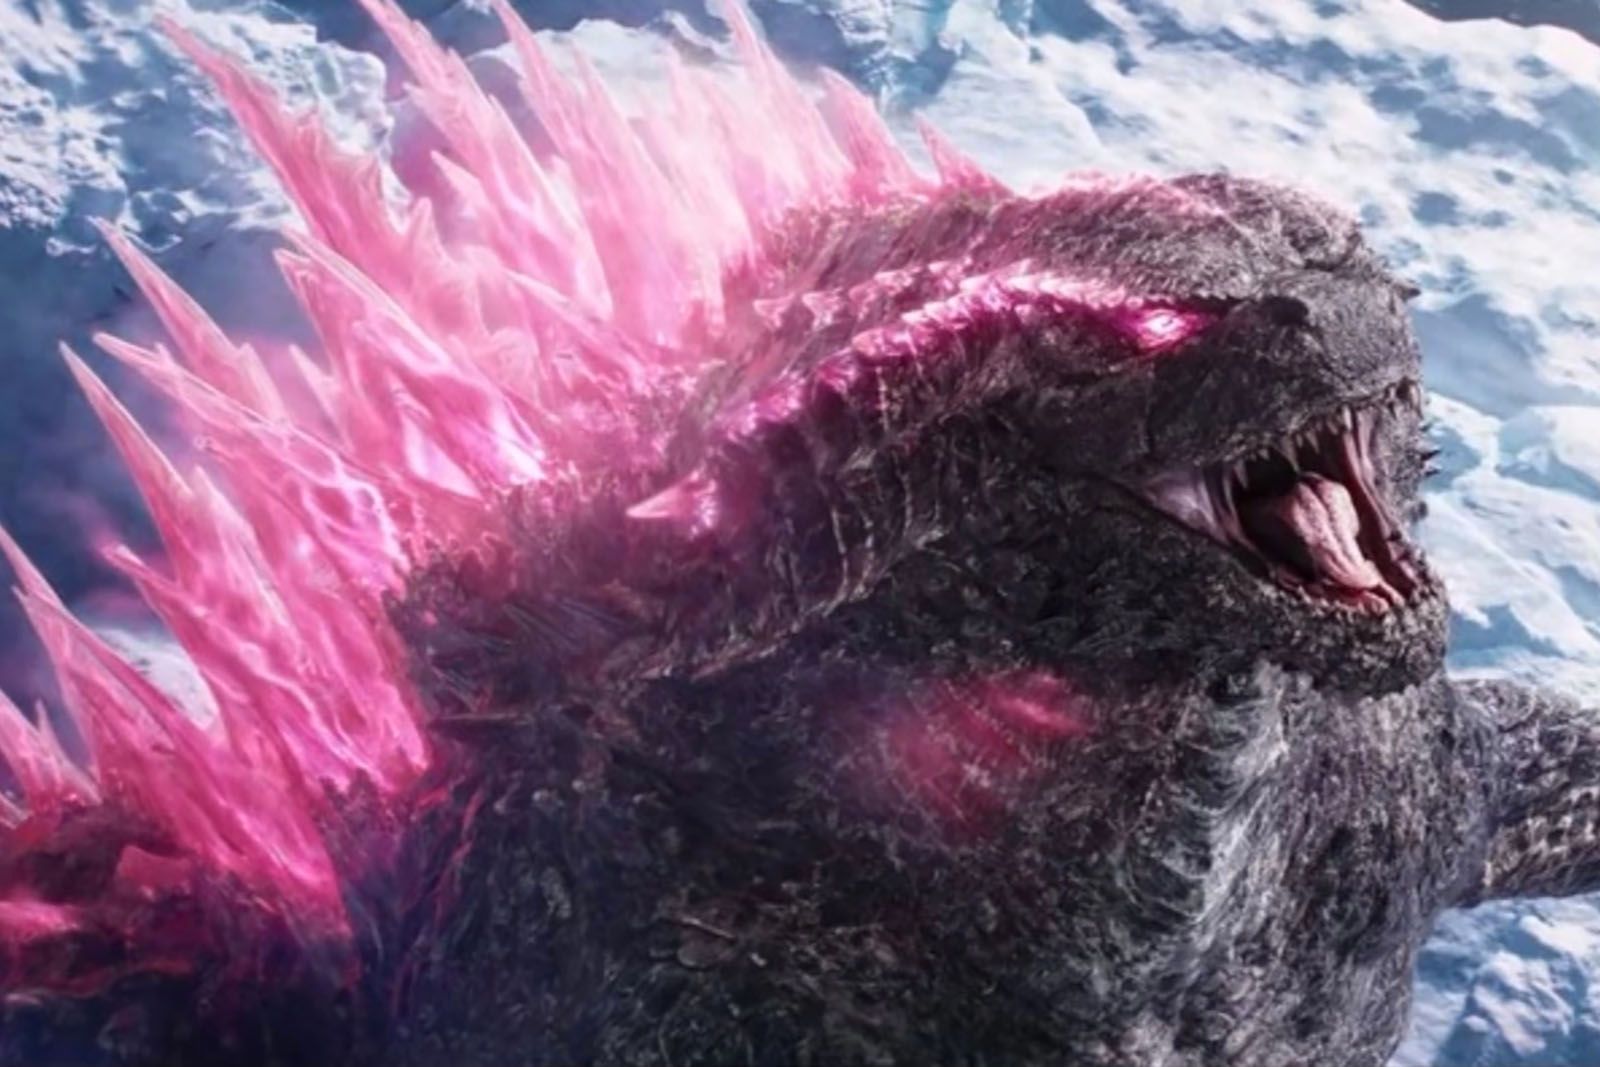 How to watch every Godzilla movie in chronological order